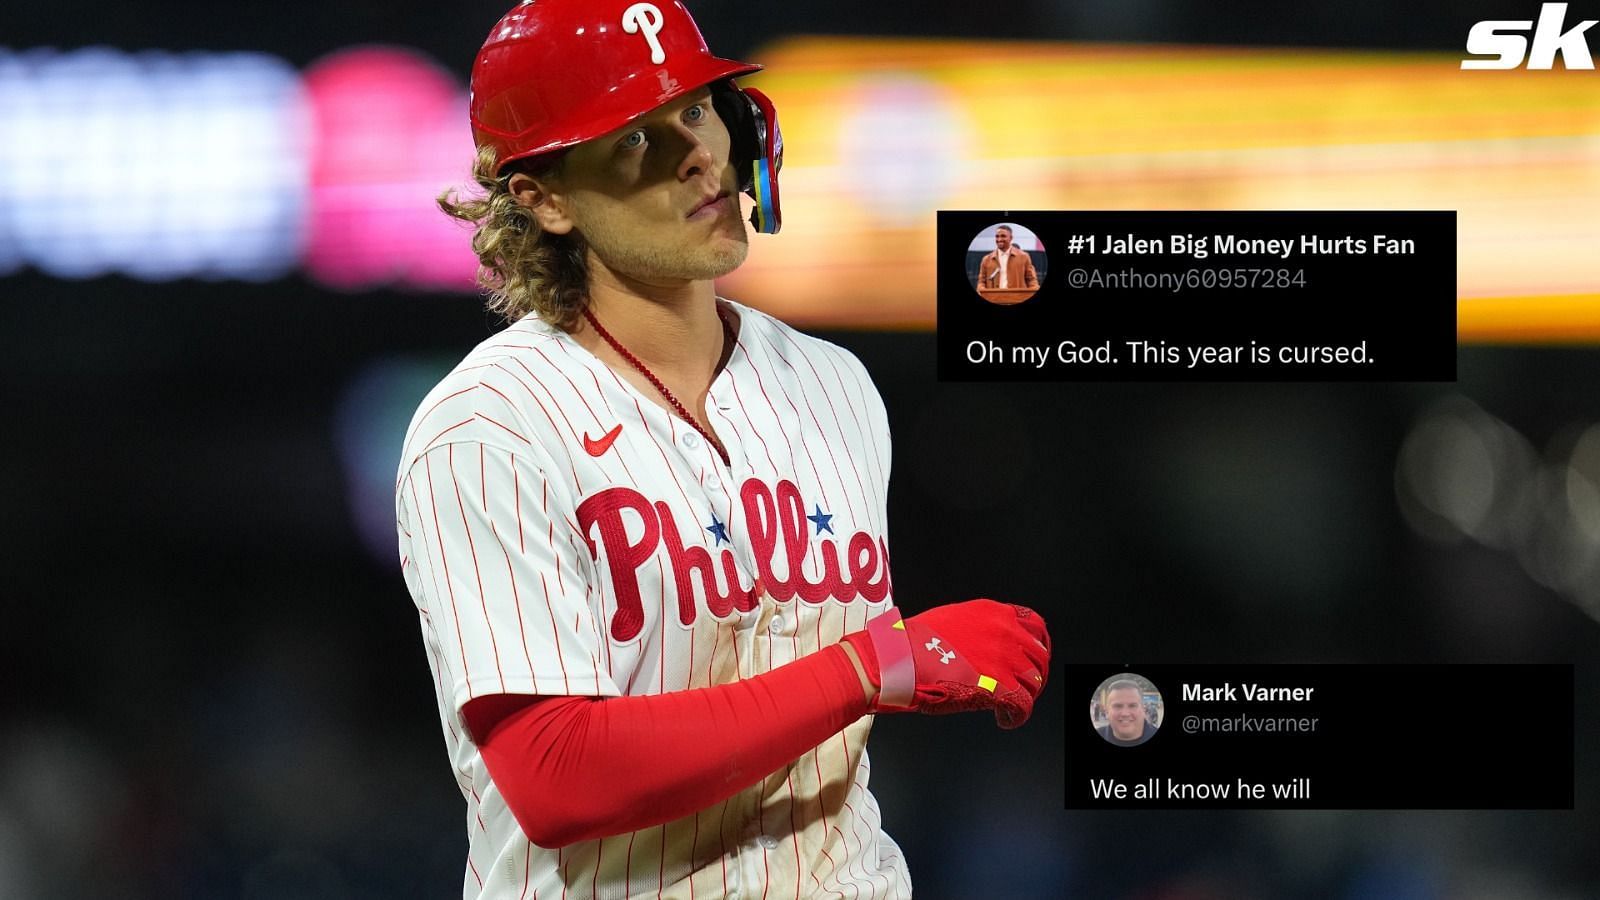 Philadelphia Phillies fans anxious as slugger Alec Bohm may require an IL  stint for sore left hamstring: This year is cursed We all know he will